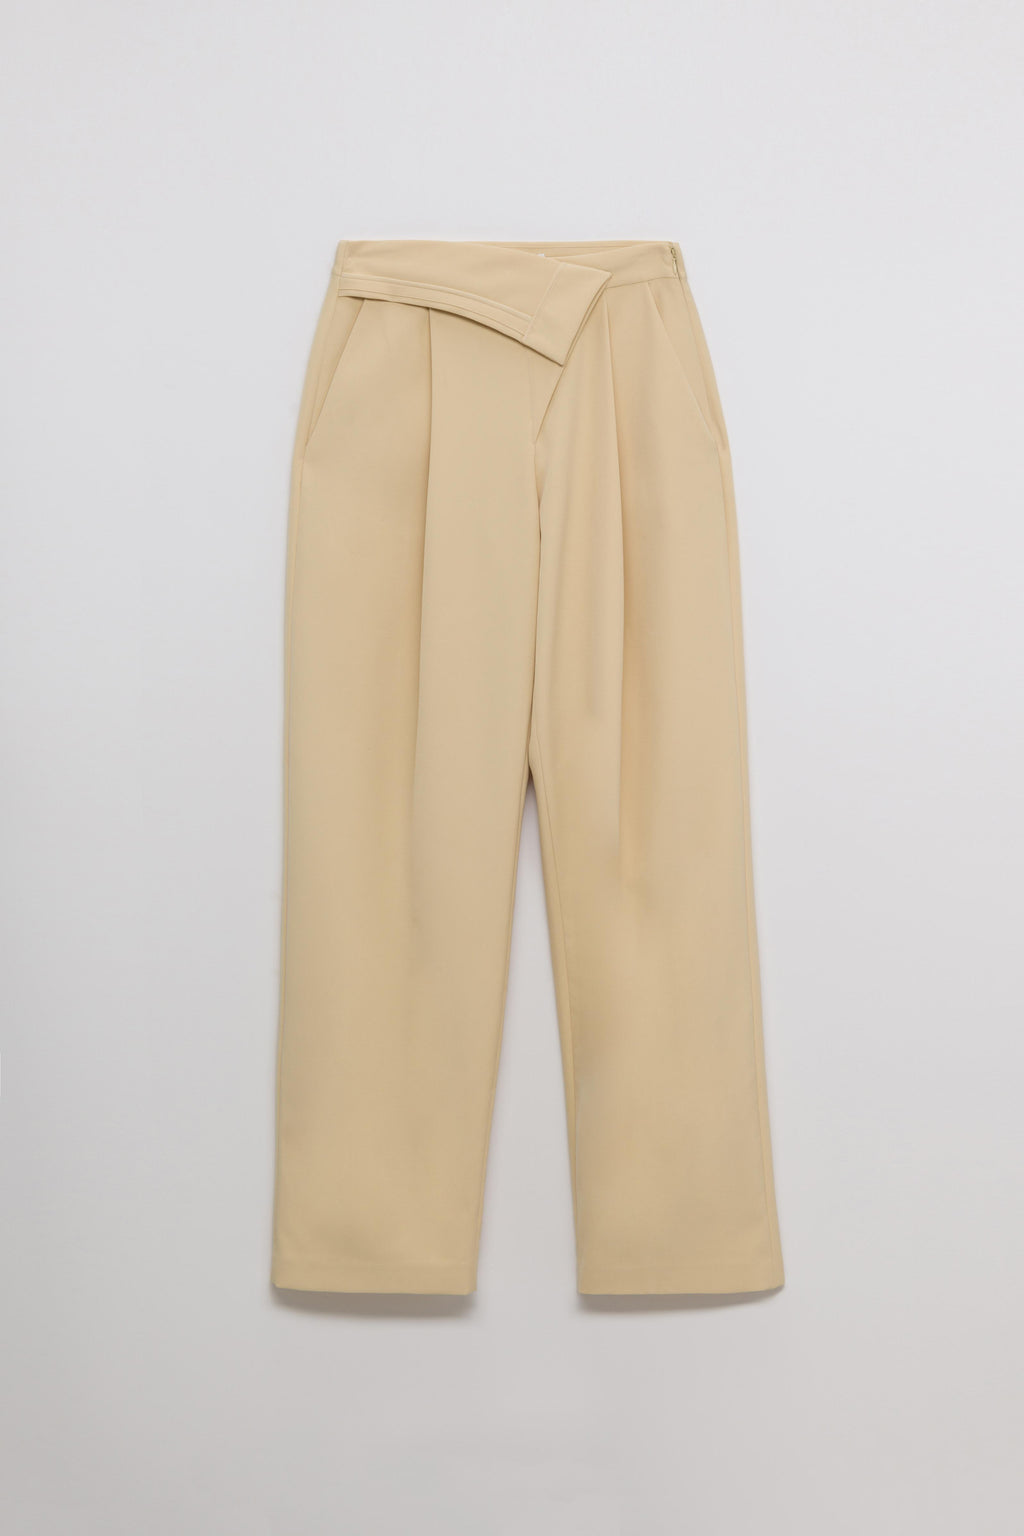 Vianka Relaxed Cocktail Pant